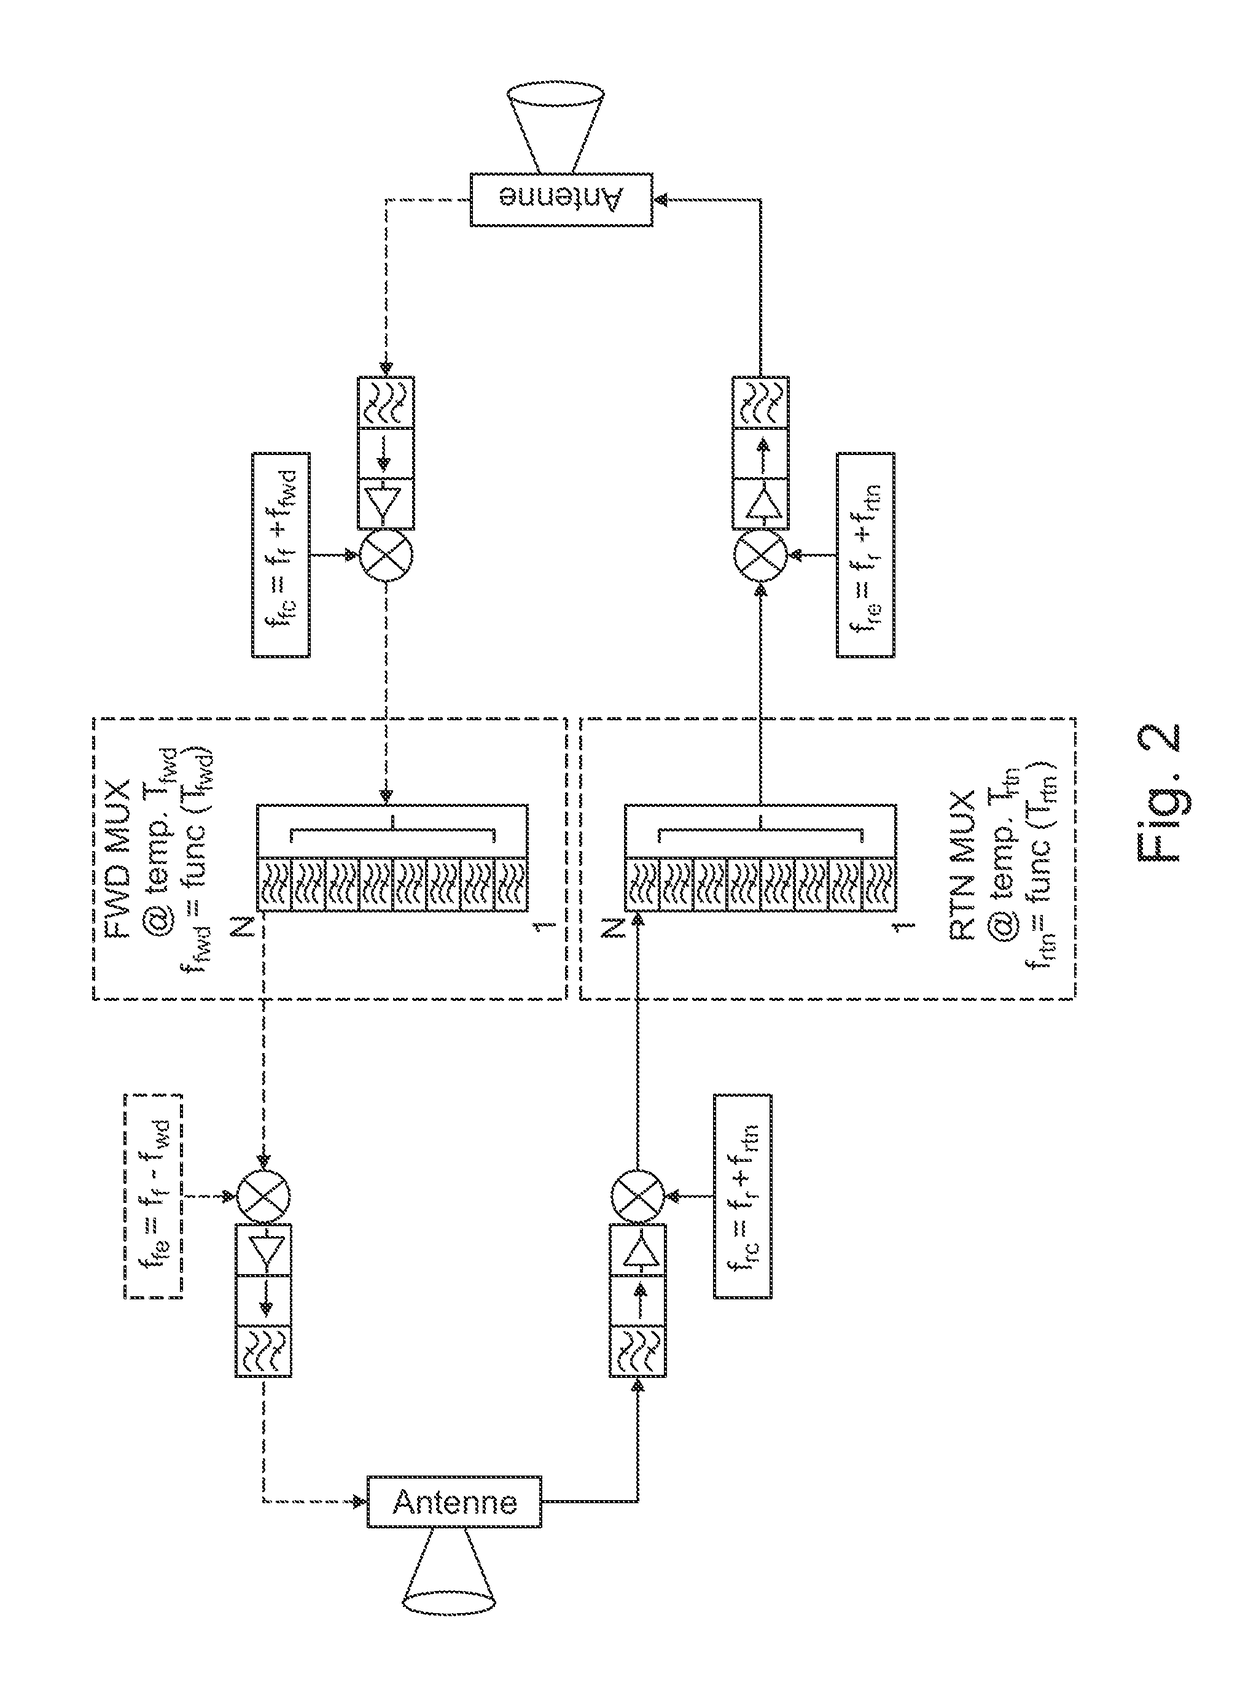 Method for operating a selective switching device for signals